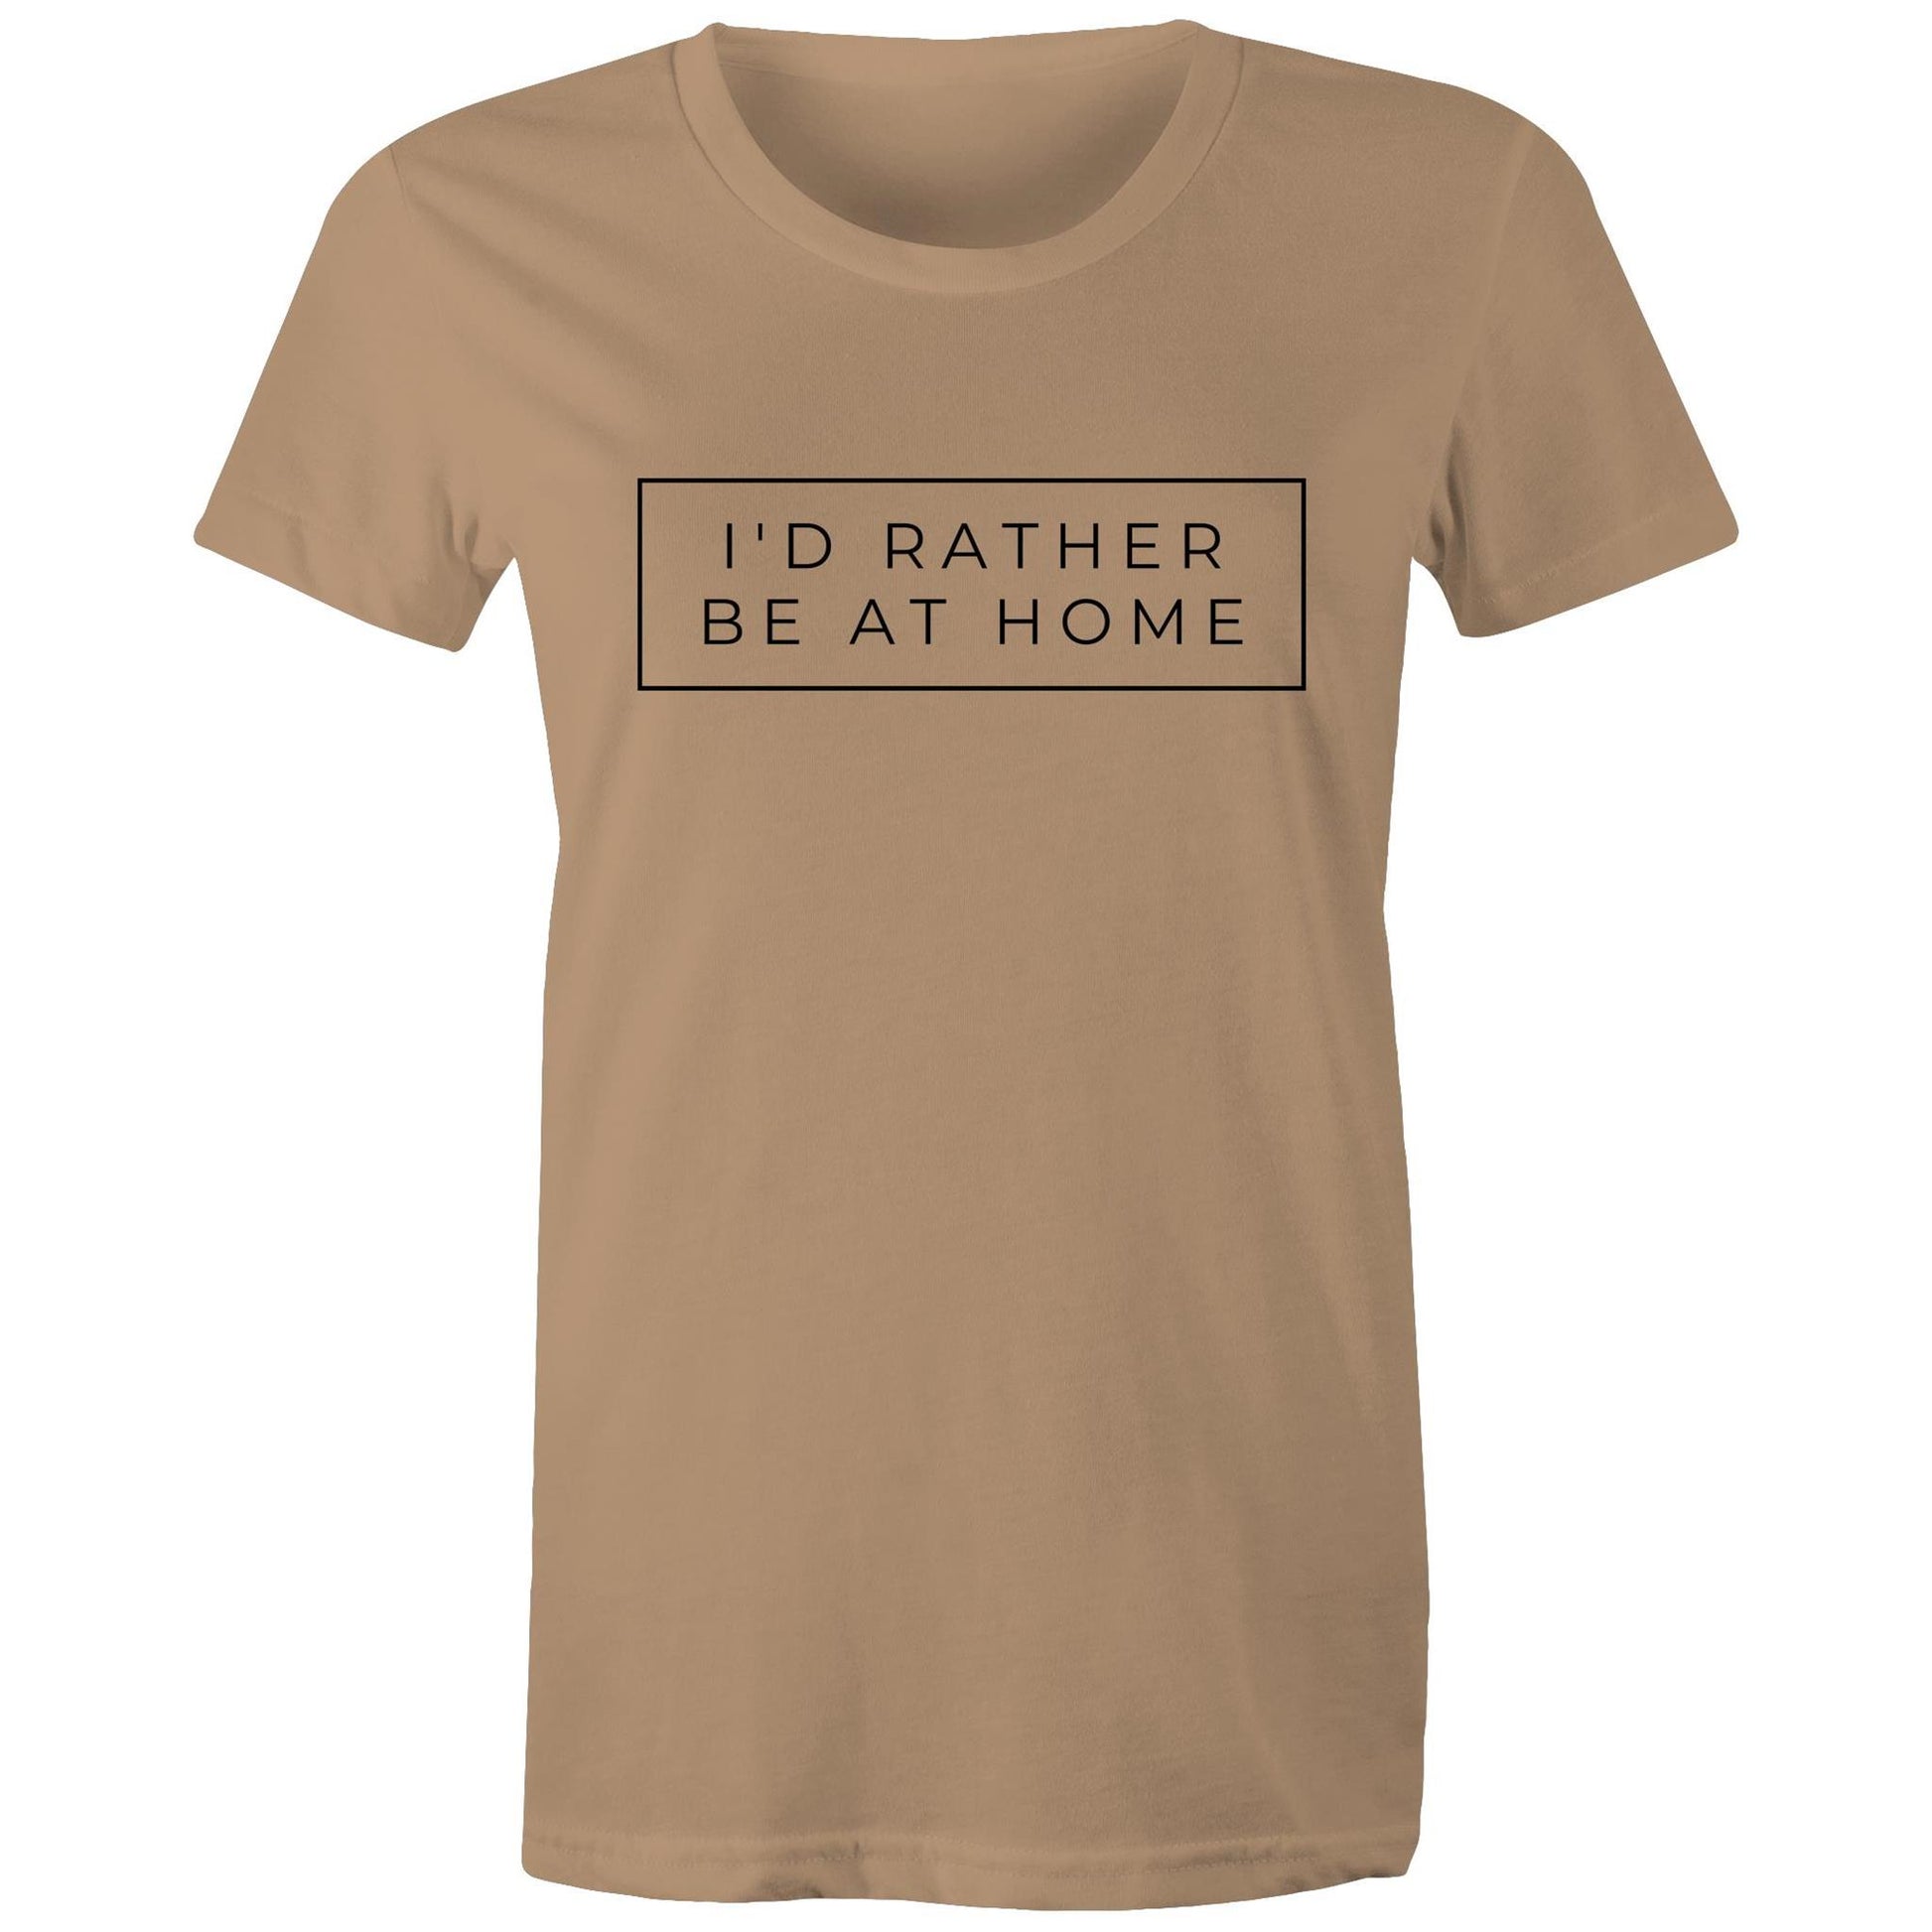 I'd Rather Be At Home - Womens T-shirt Tan Womens T-shirt home